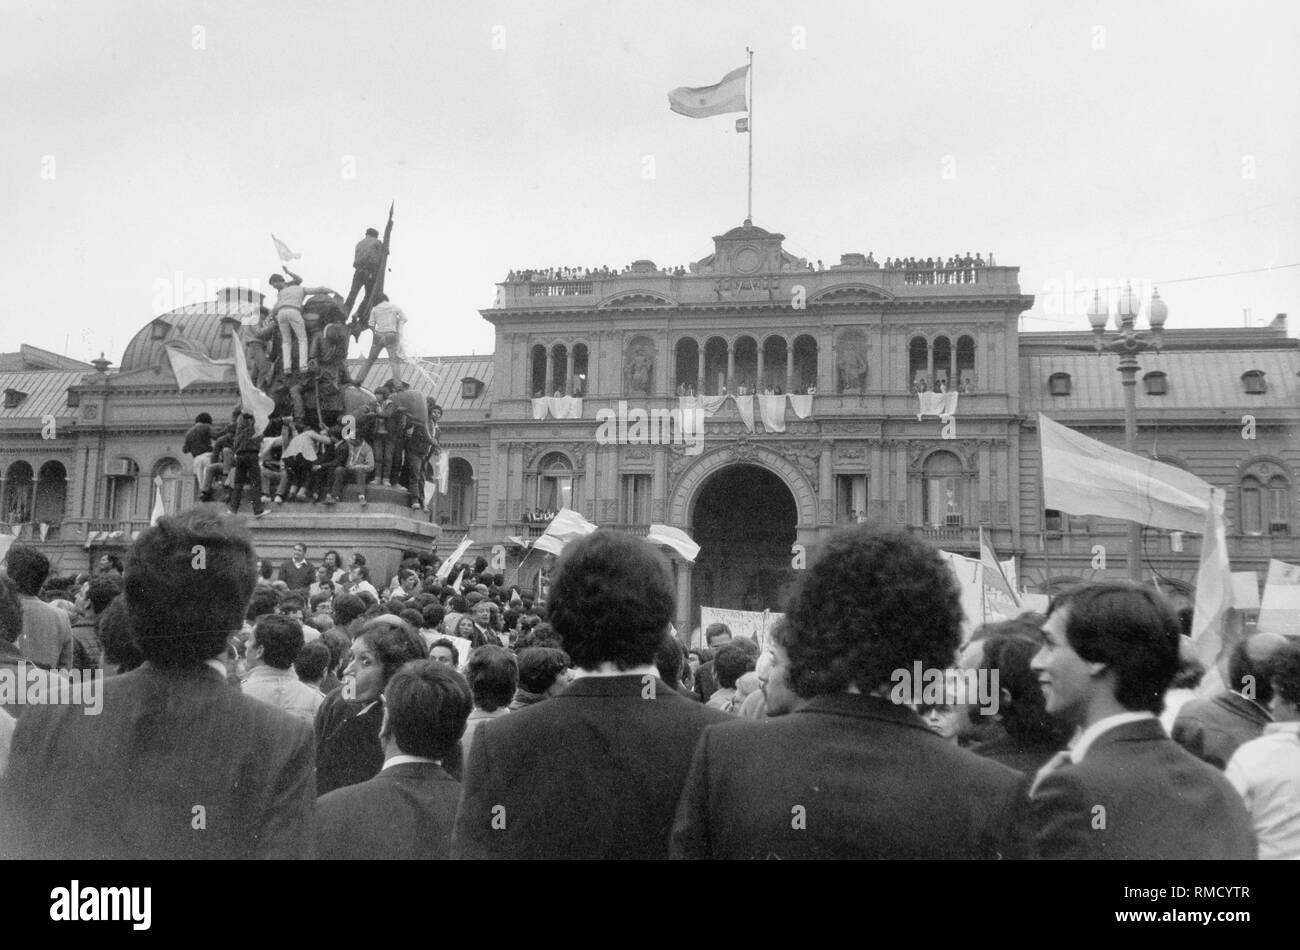 demonstration-in-front-of-the-presidential-palace-in-buenos-aires-in-april-1982-RMCYTR.jpg